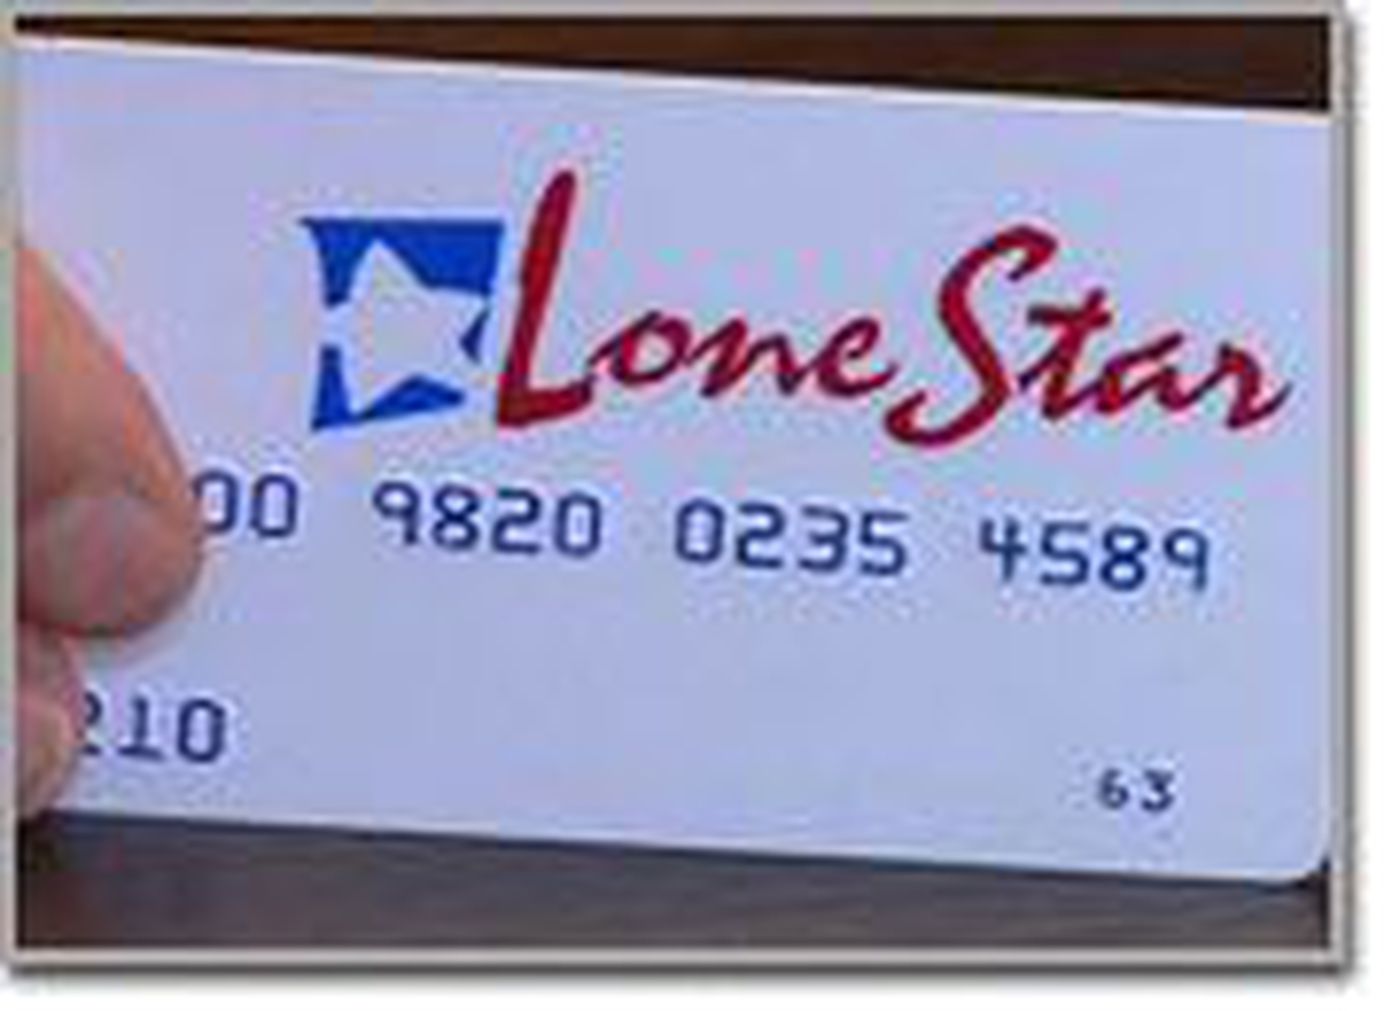 Texas fined for food stamp fraud  happening in Lubbock